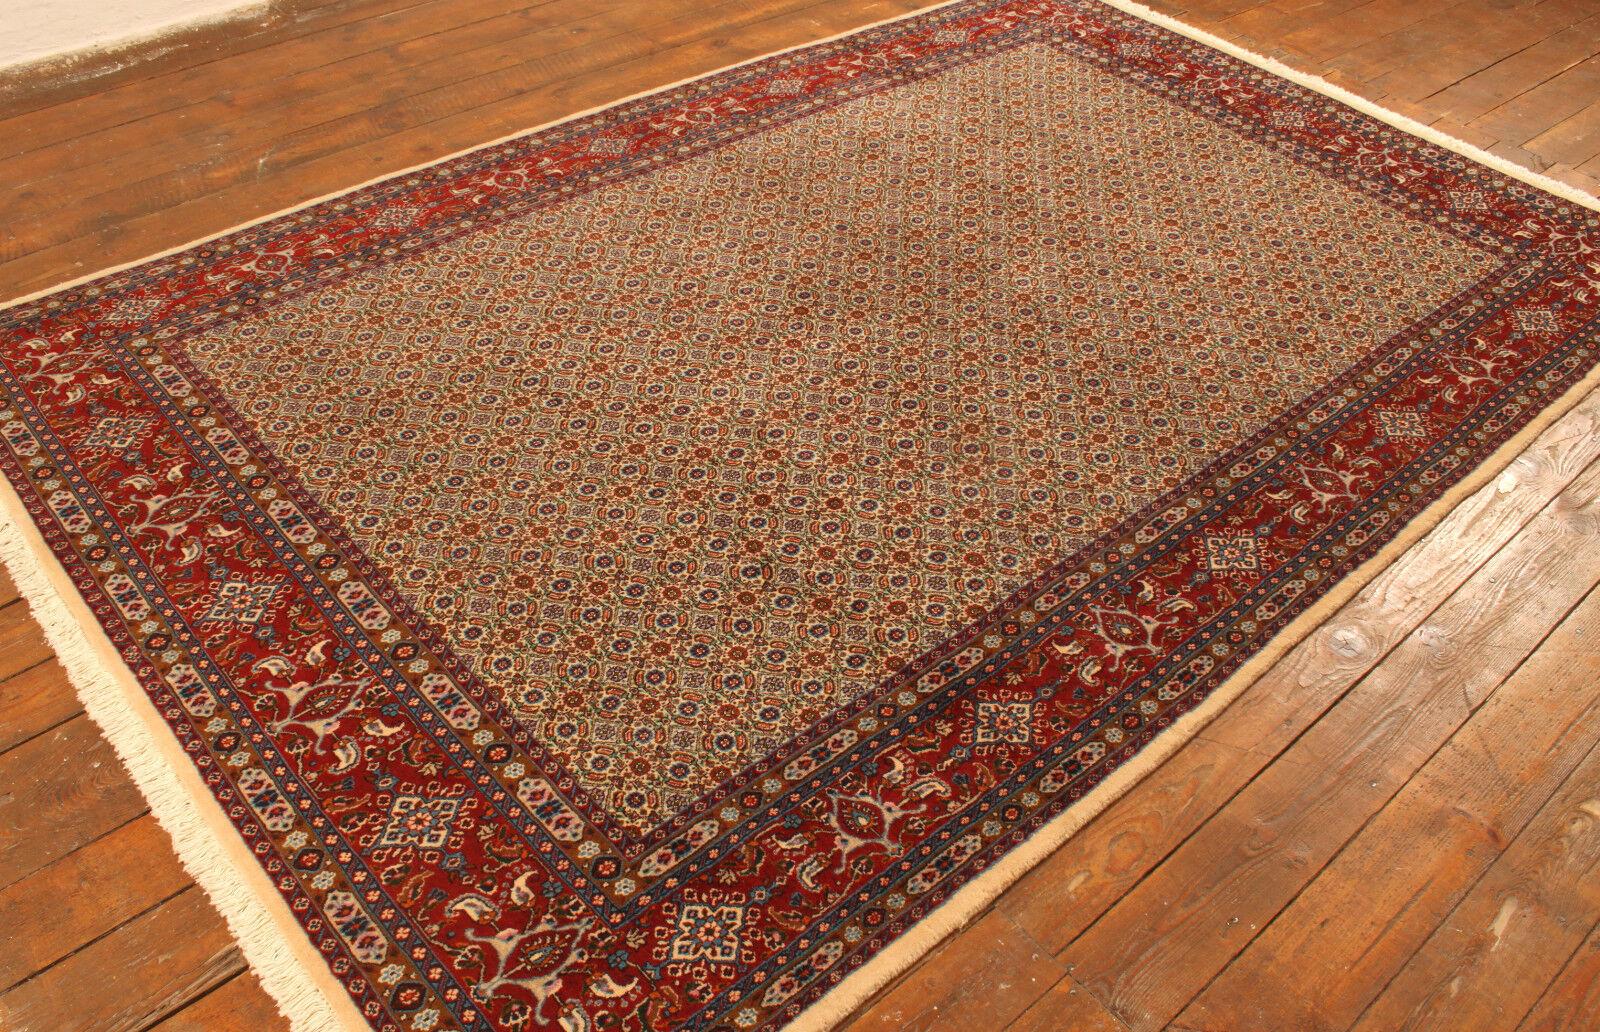 Wool Handmade Vintage Indian Mahal Rug 6.3' x 9.8', 1970s - 1T30 For Sale